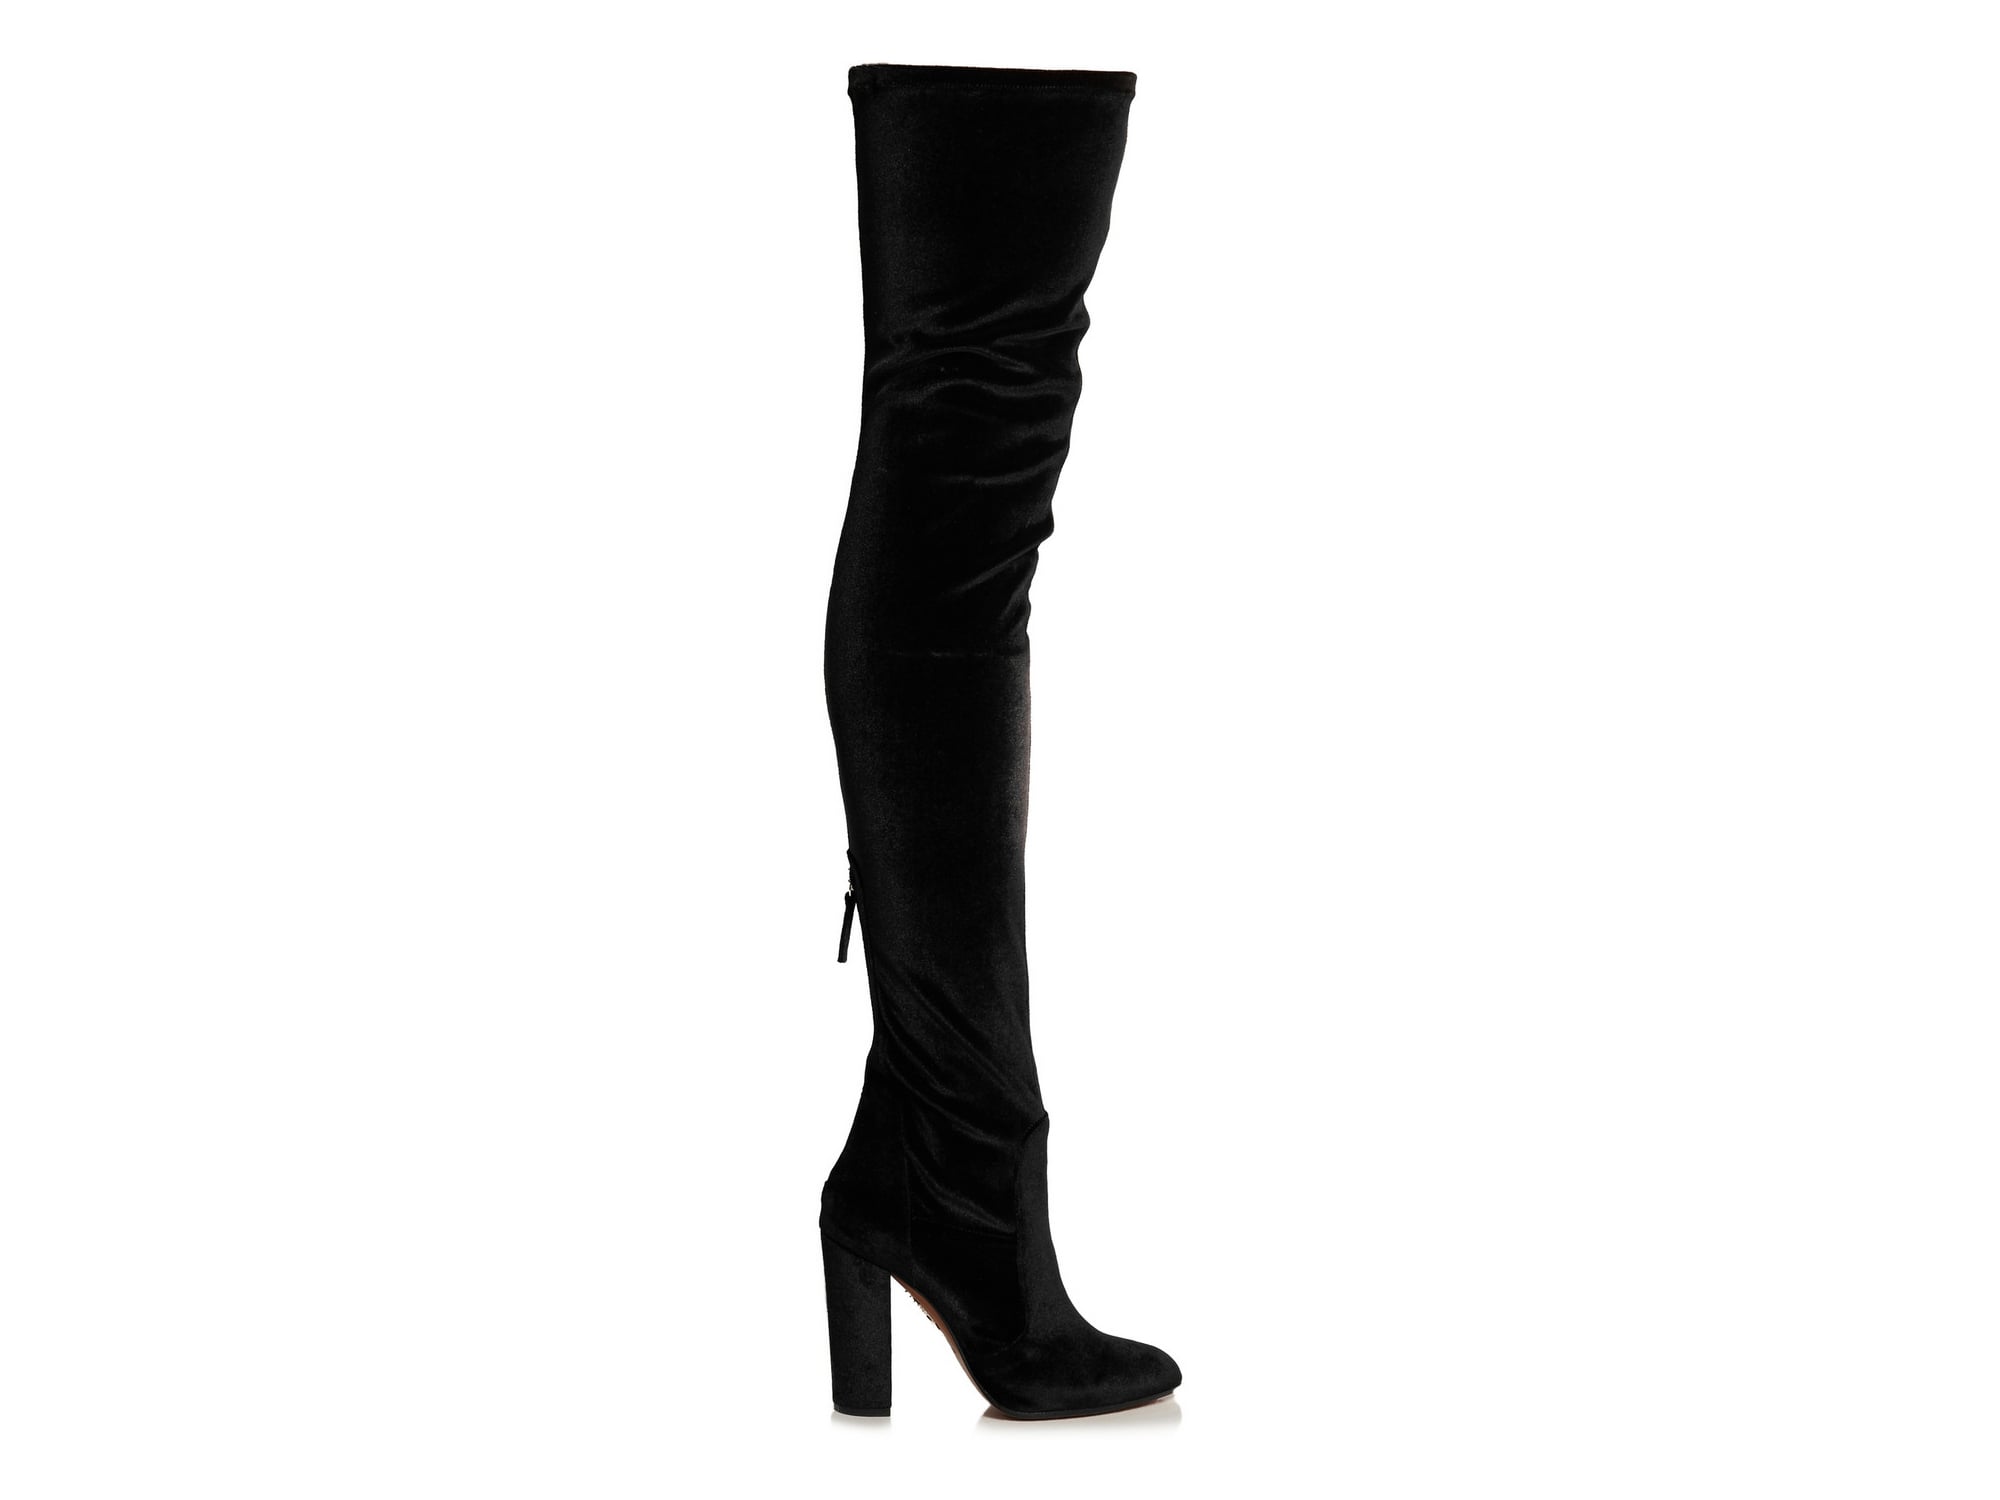 Aquazzura Velvet Over The Knee Boots 597 Originally 995 The Ultimate 11 Holiday Party Looks You Need From Net A Porter Com S Brand New Sale Popsugar Fashion Photo 4